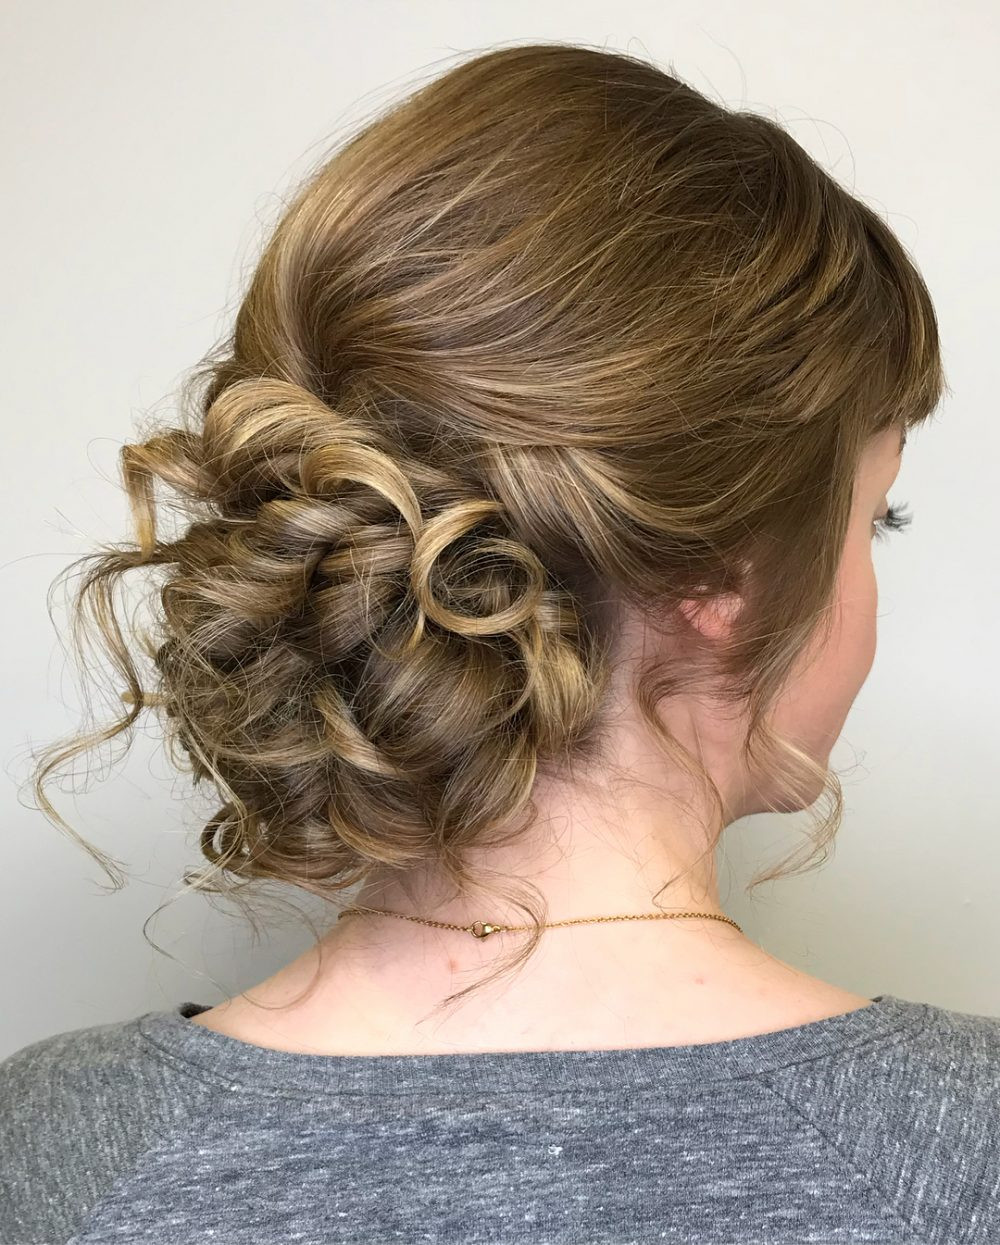 Cute Fancy Hairstyles
 23 Cute Prom Hairstyles for 2019 Updos Braids Half Ups